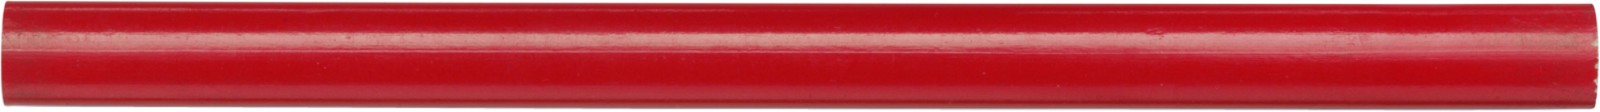 Wooden carpenter's pencil - Red